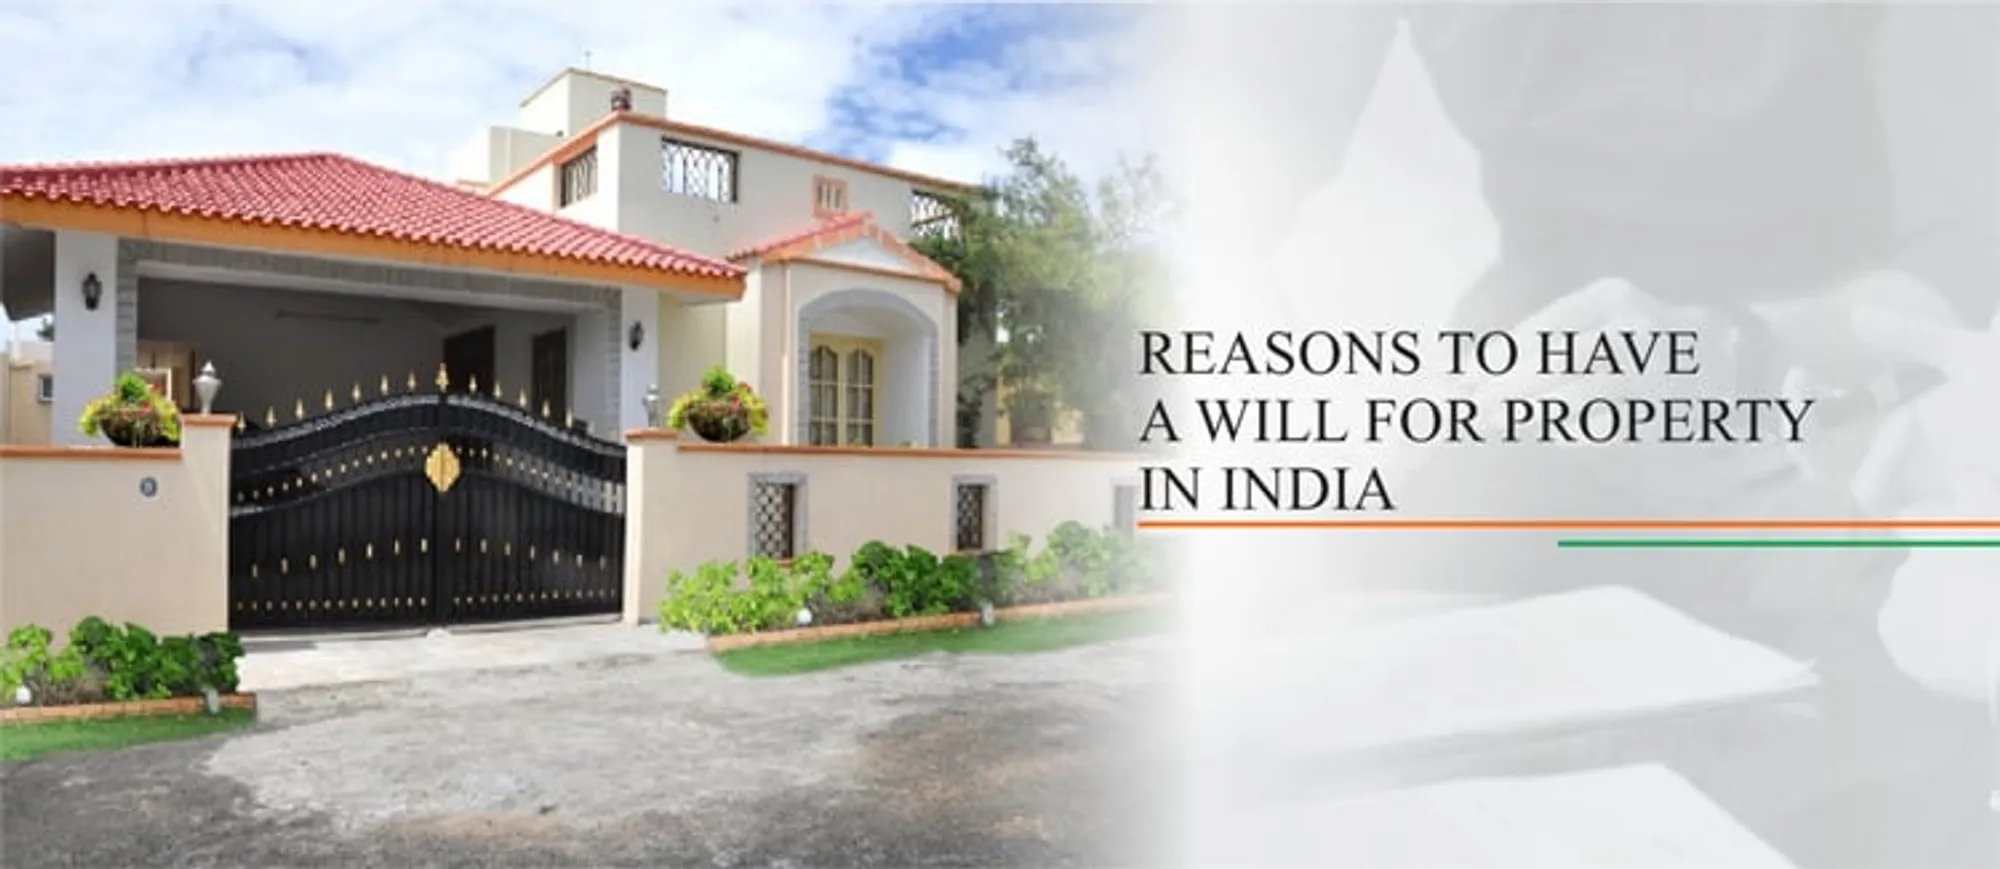 Reasons to have a Will for Property in India